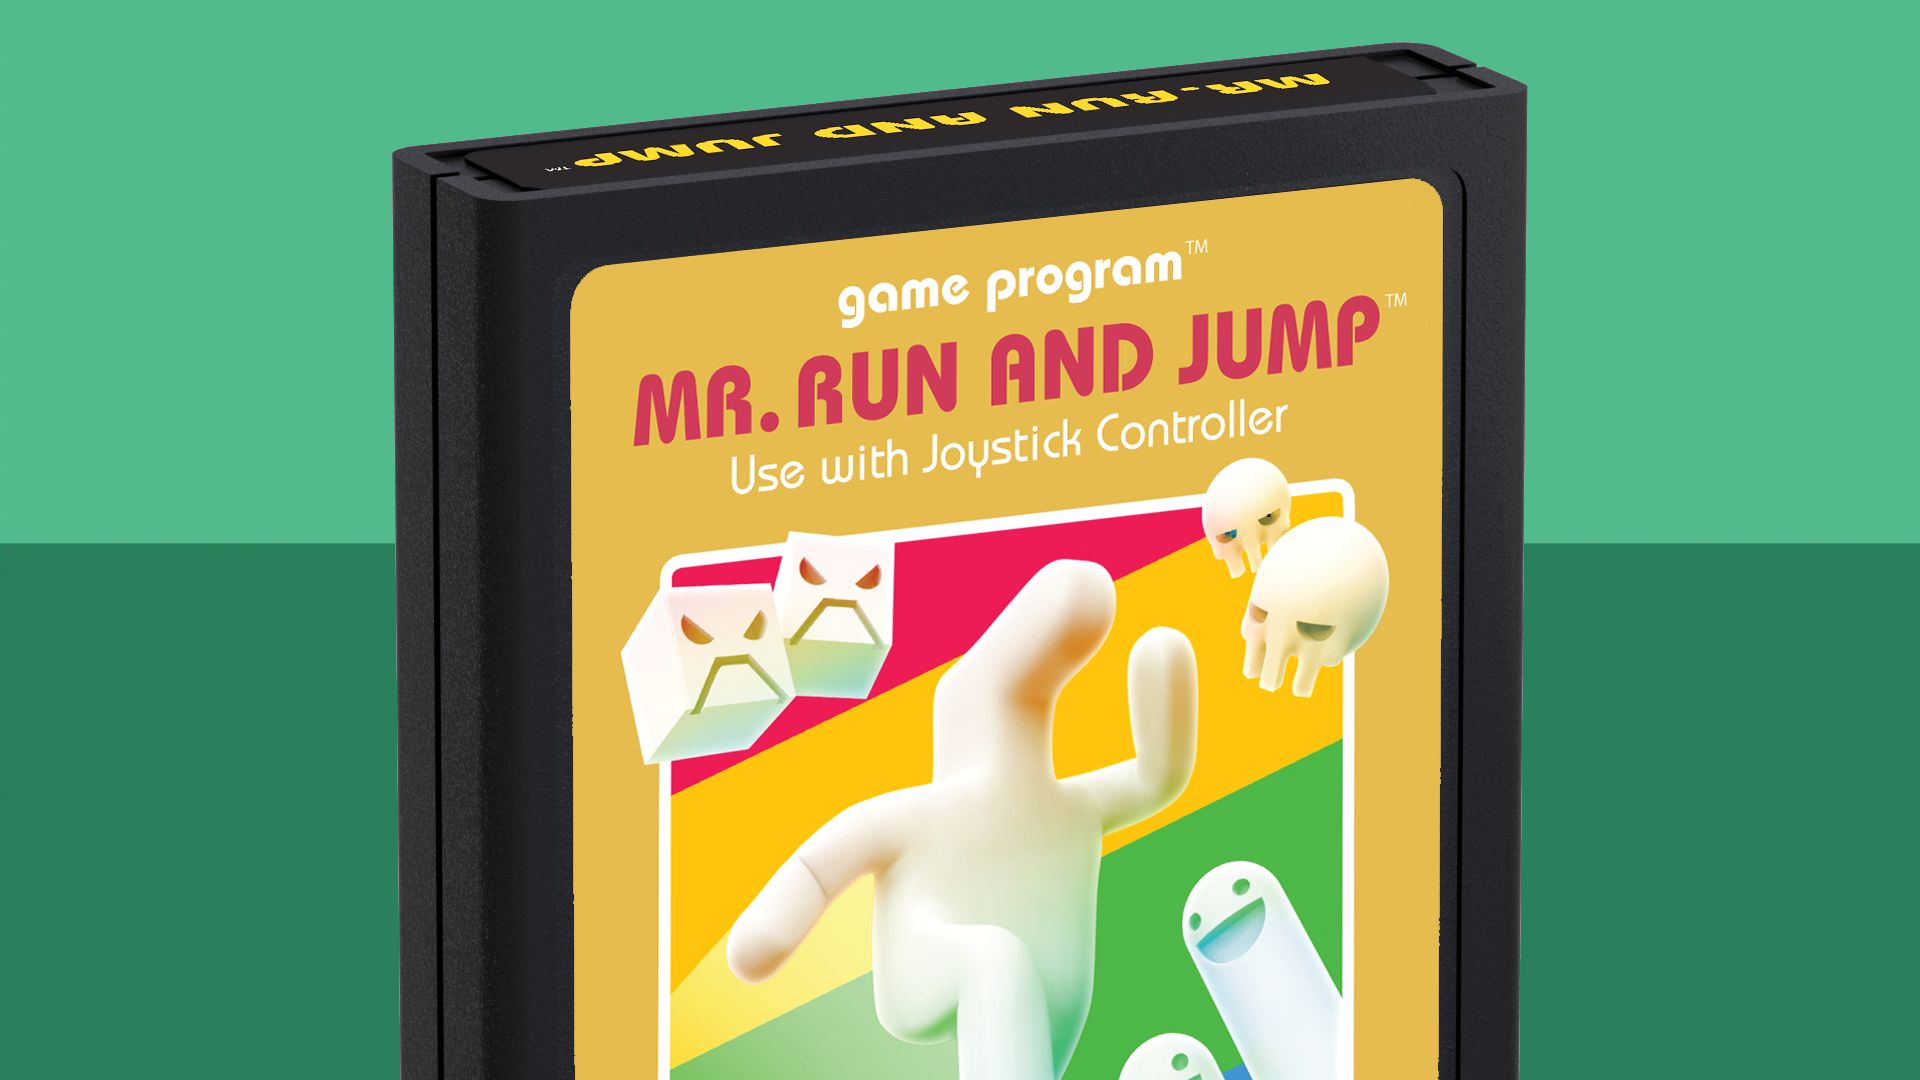 Atari just announced the first new Atari 2600 game in more than 30 years